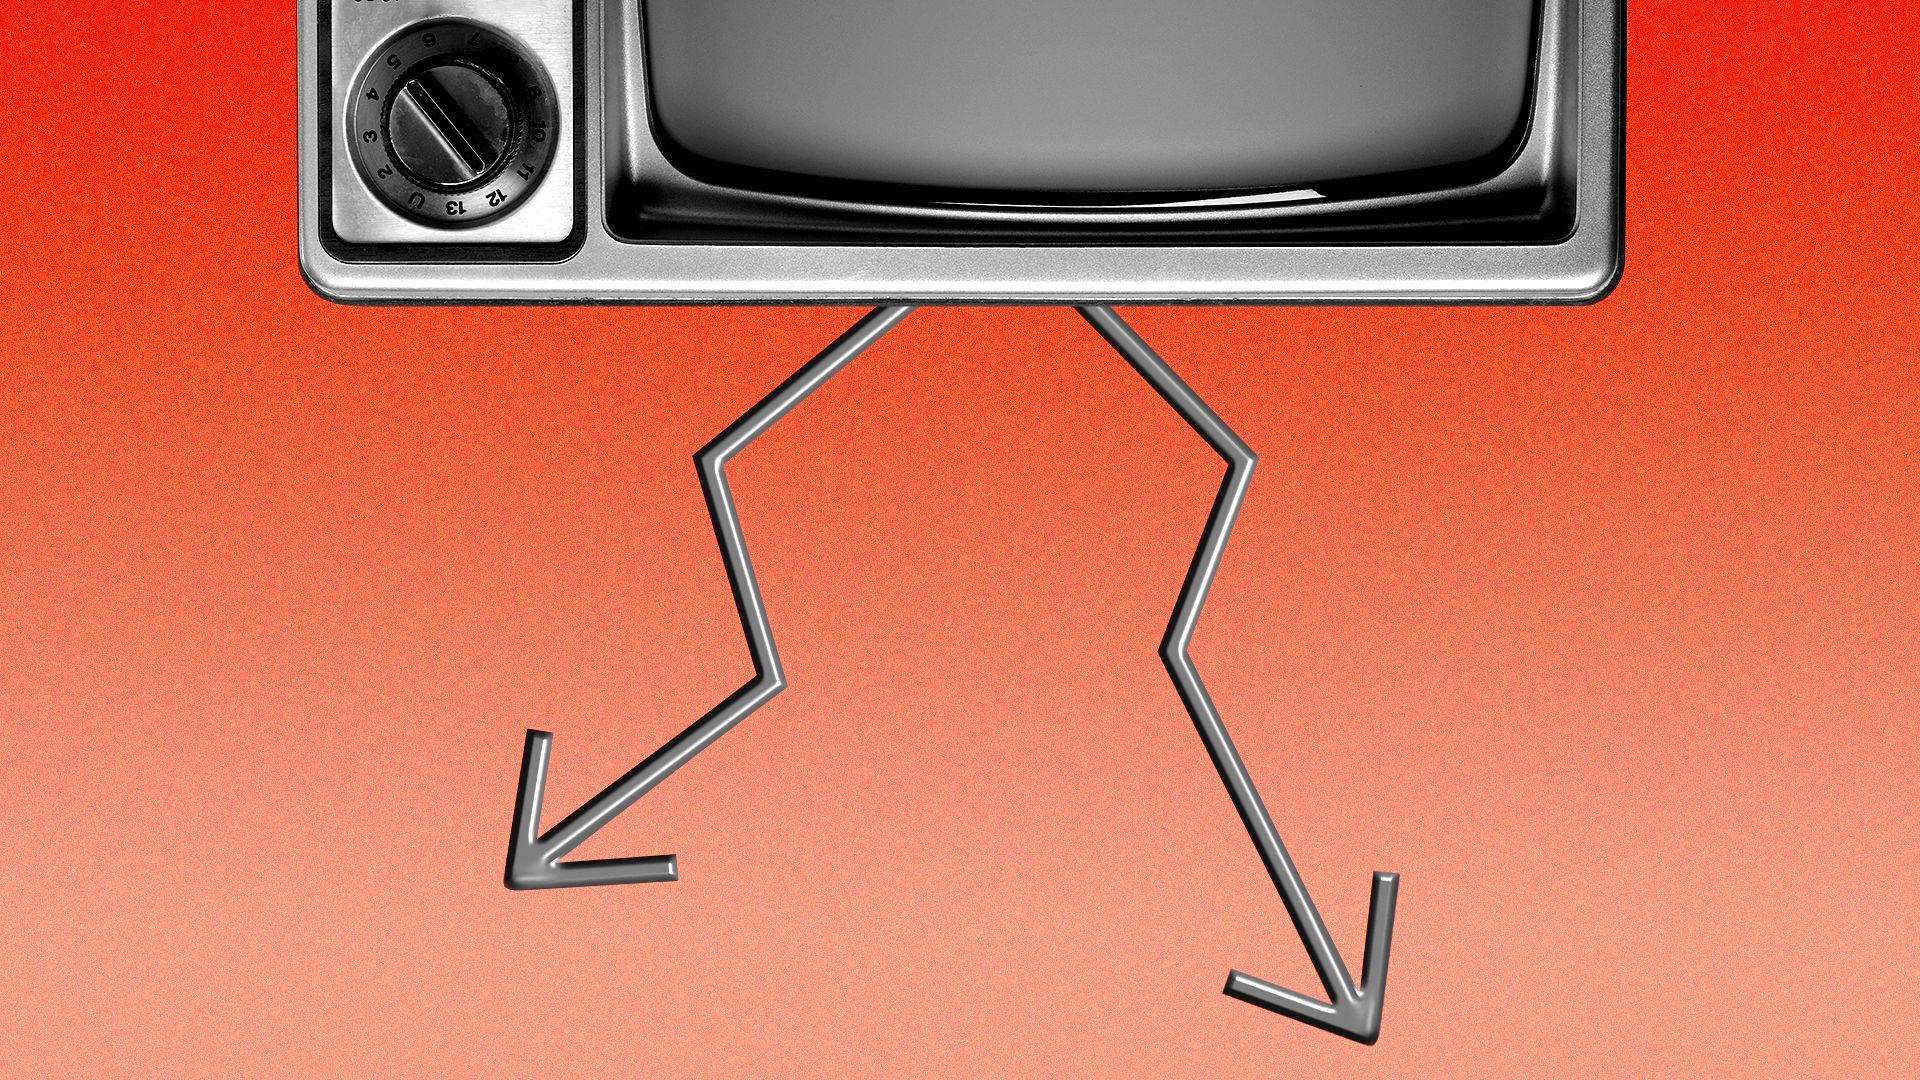 Illustration of an upside down television with antennas shaped like downward pointing trend lines 